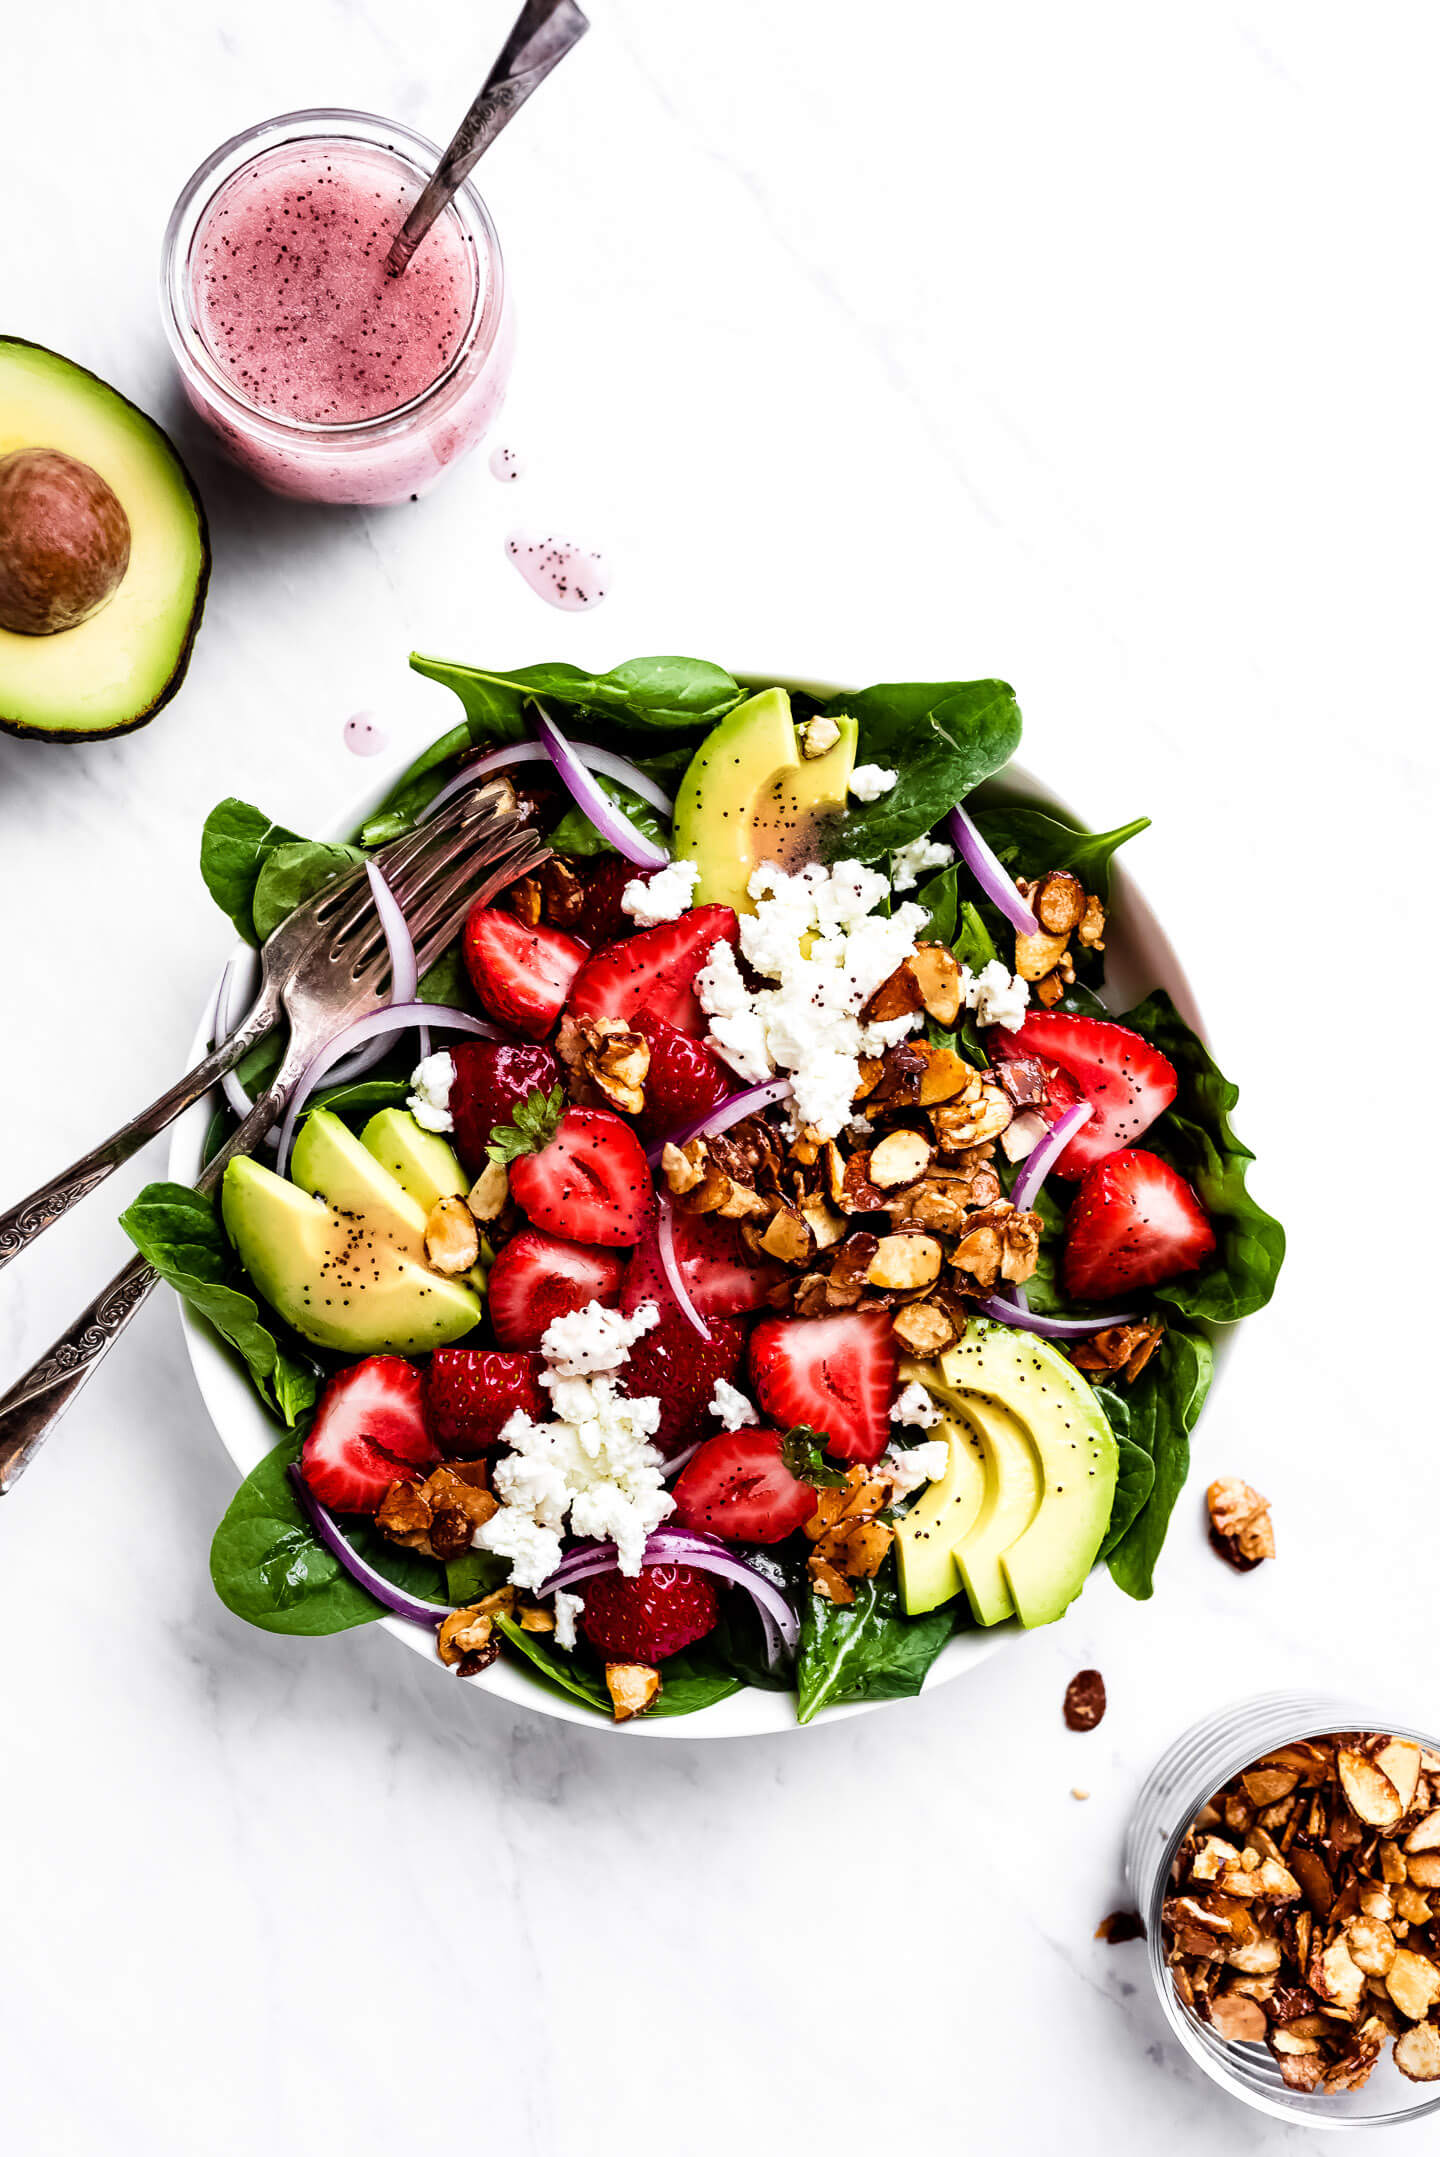 A strawberry and spinach salad with avocados and sliced almonds with poppy seed dressing.